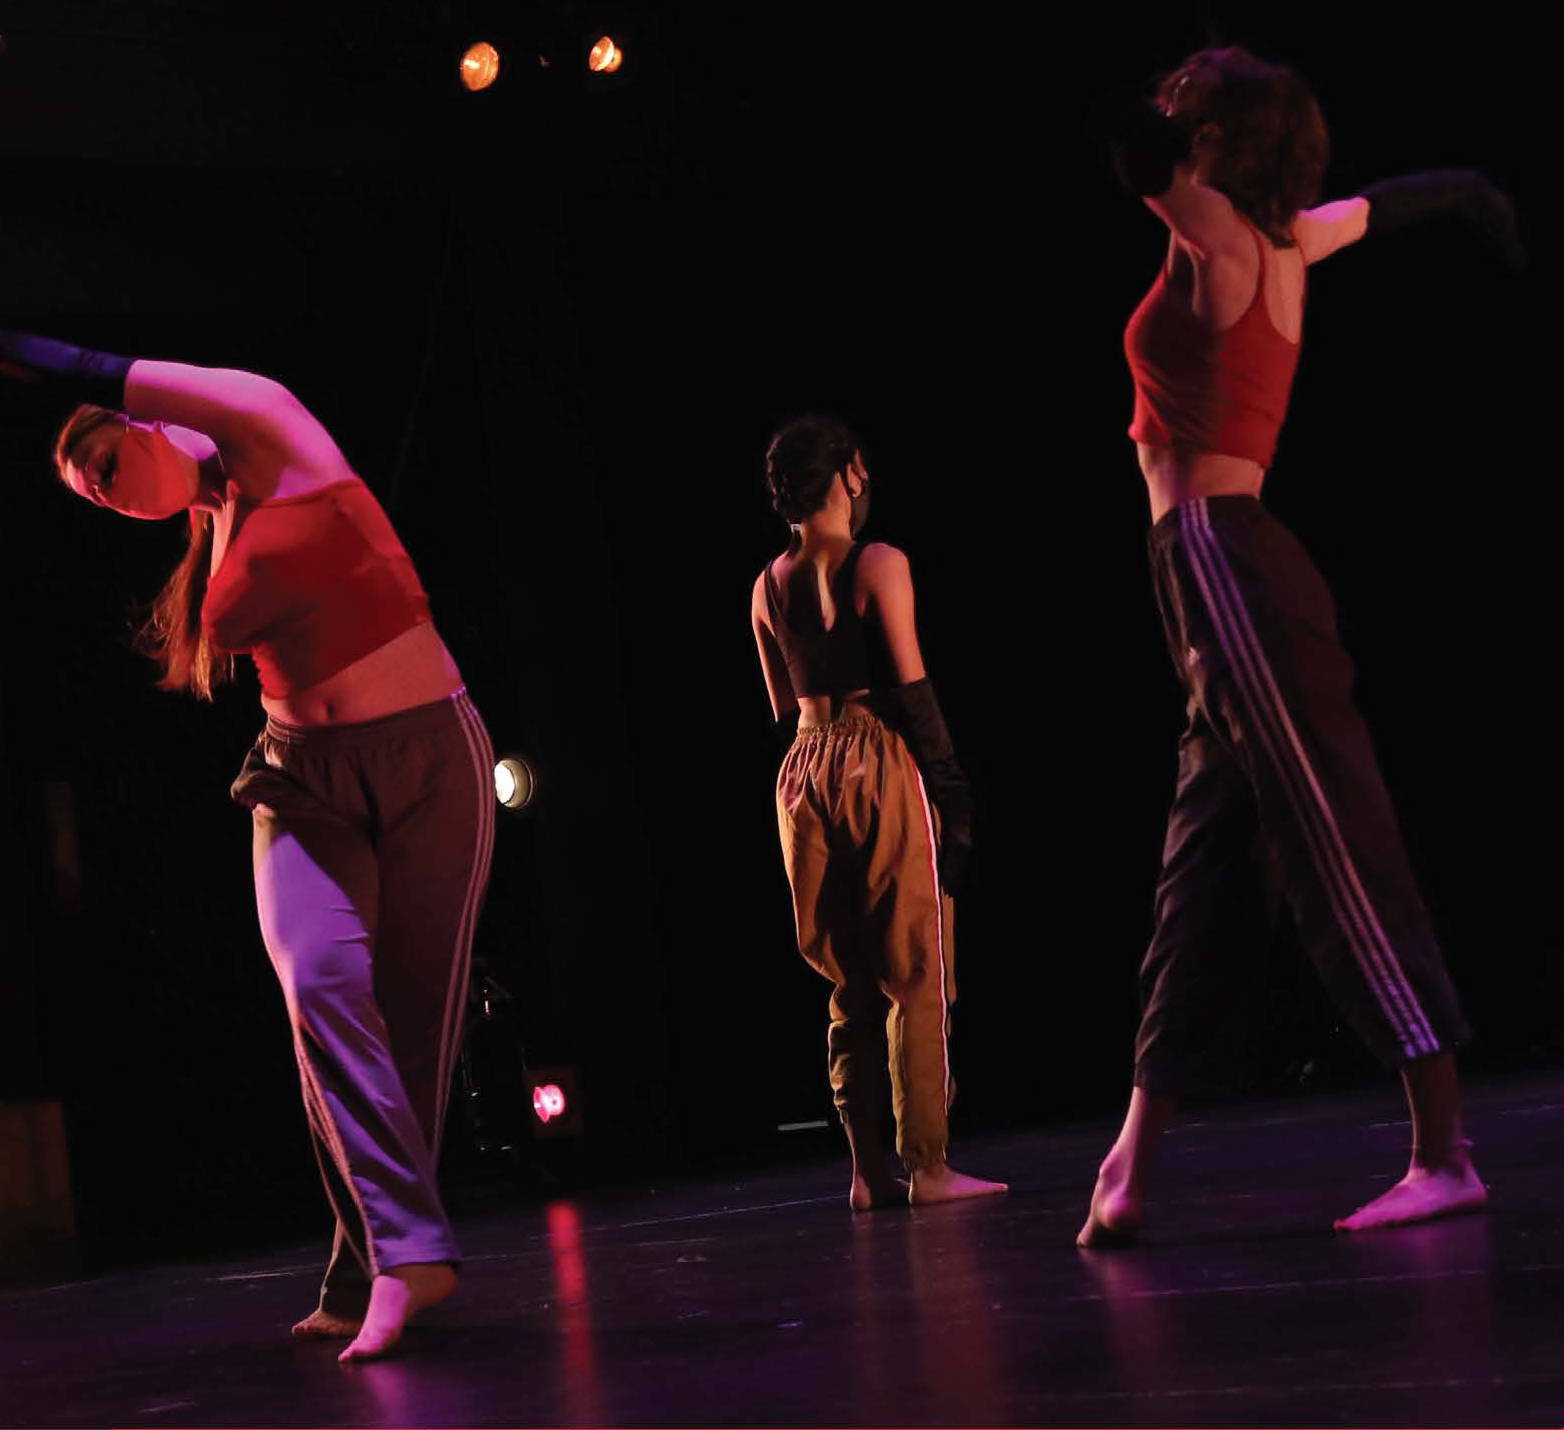 An Evening of Dance will be held with an in-person audience at the Lied Center for Performing Arts on April 28. The concert will also be live webcast at http://liedcenter.org/live.